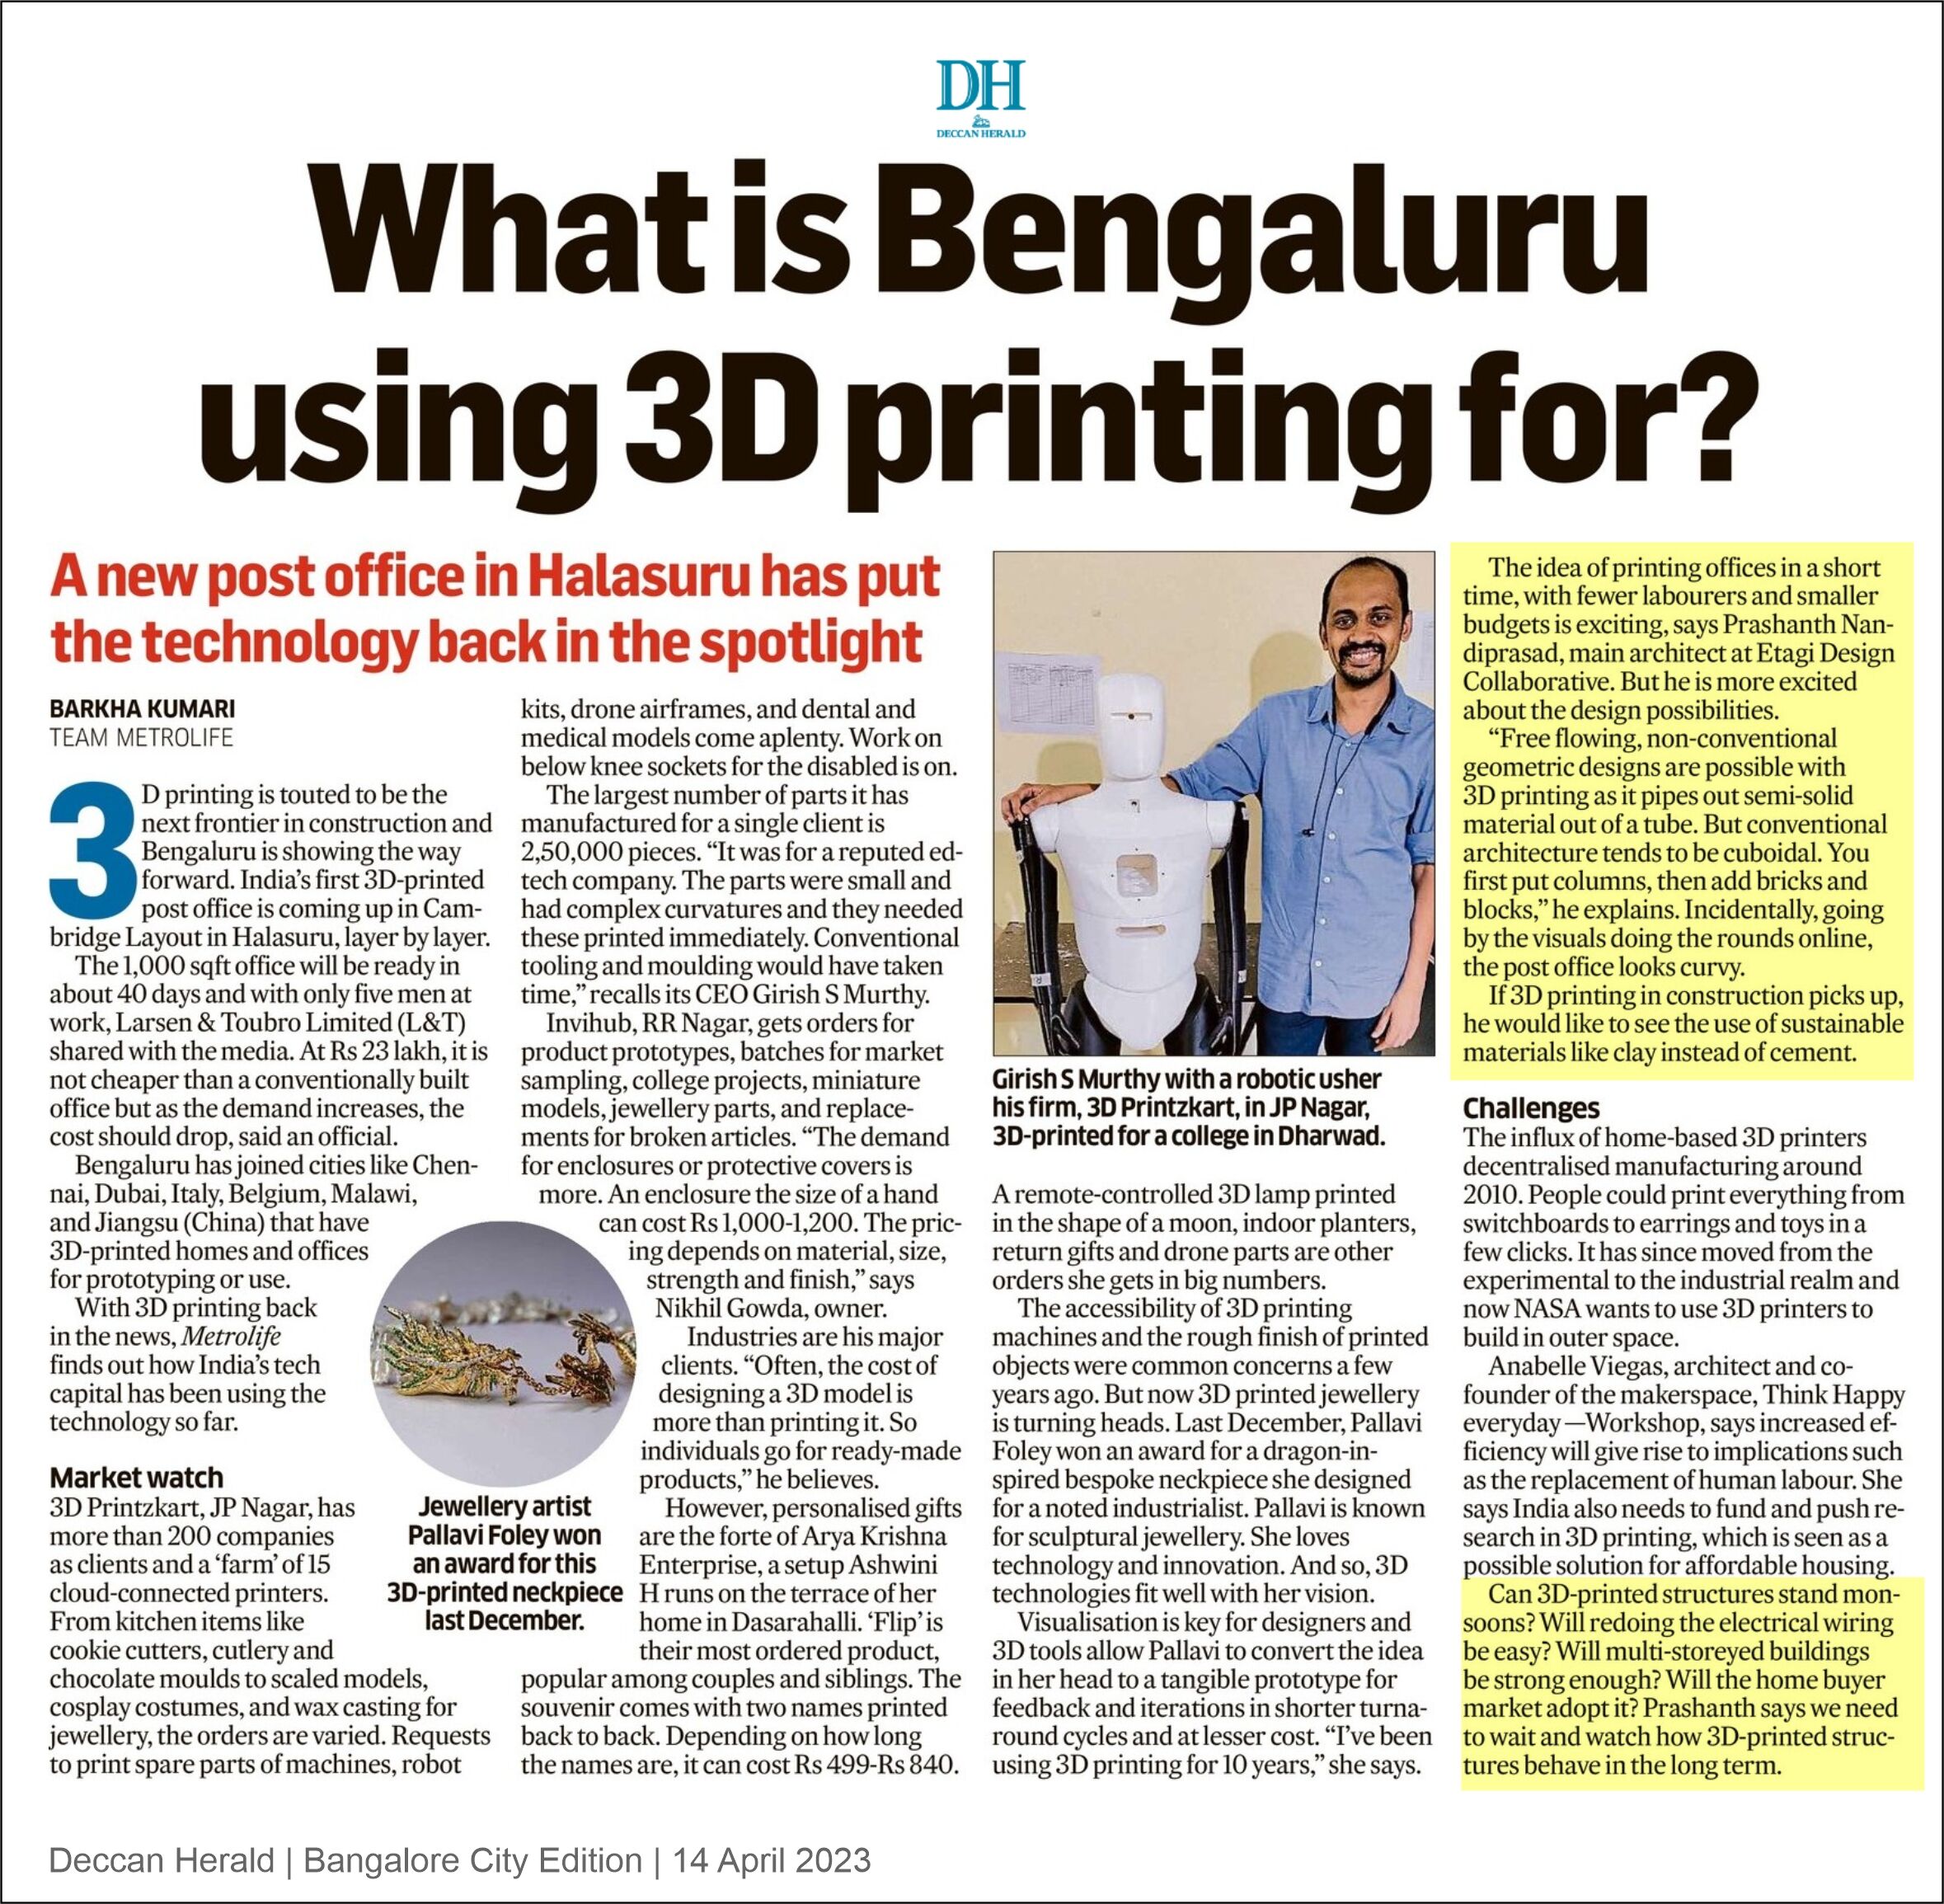 What Is Bengaluru Using 3D Printing For?